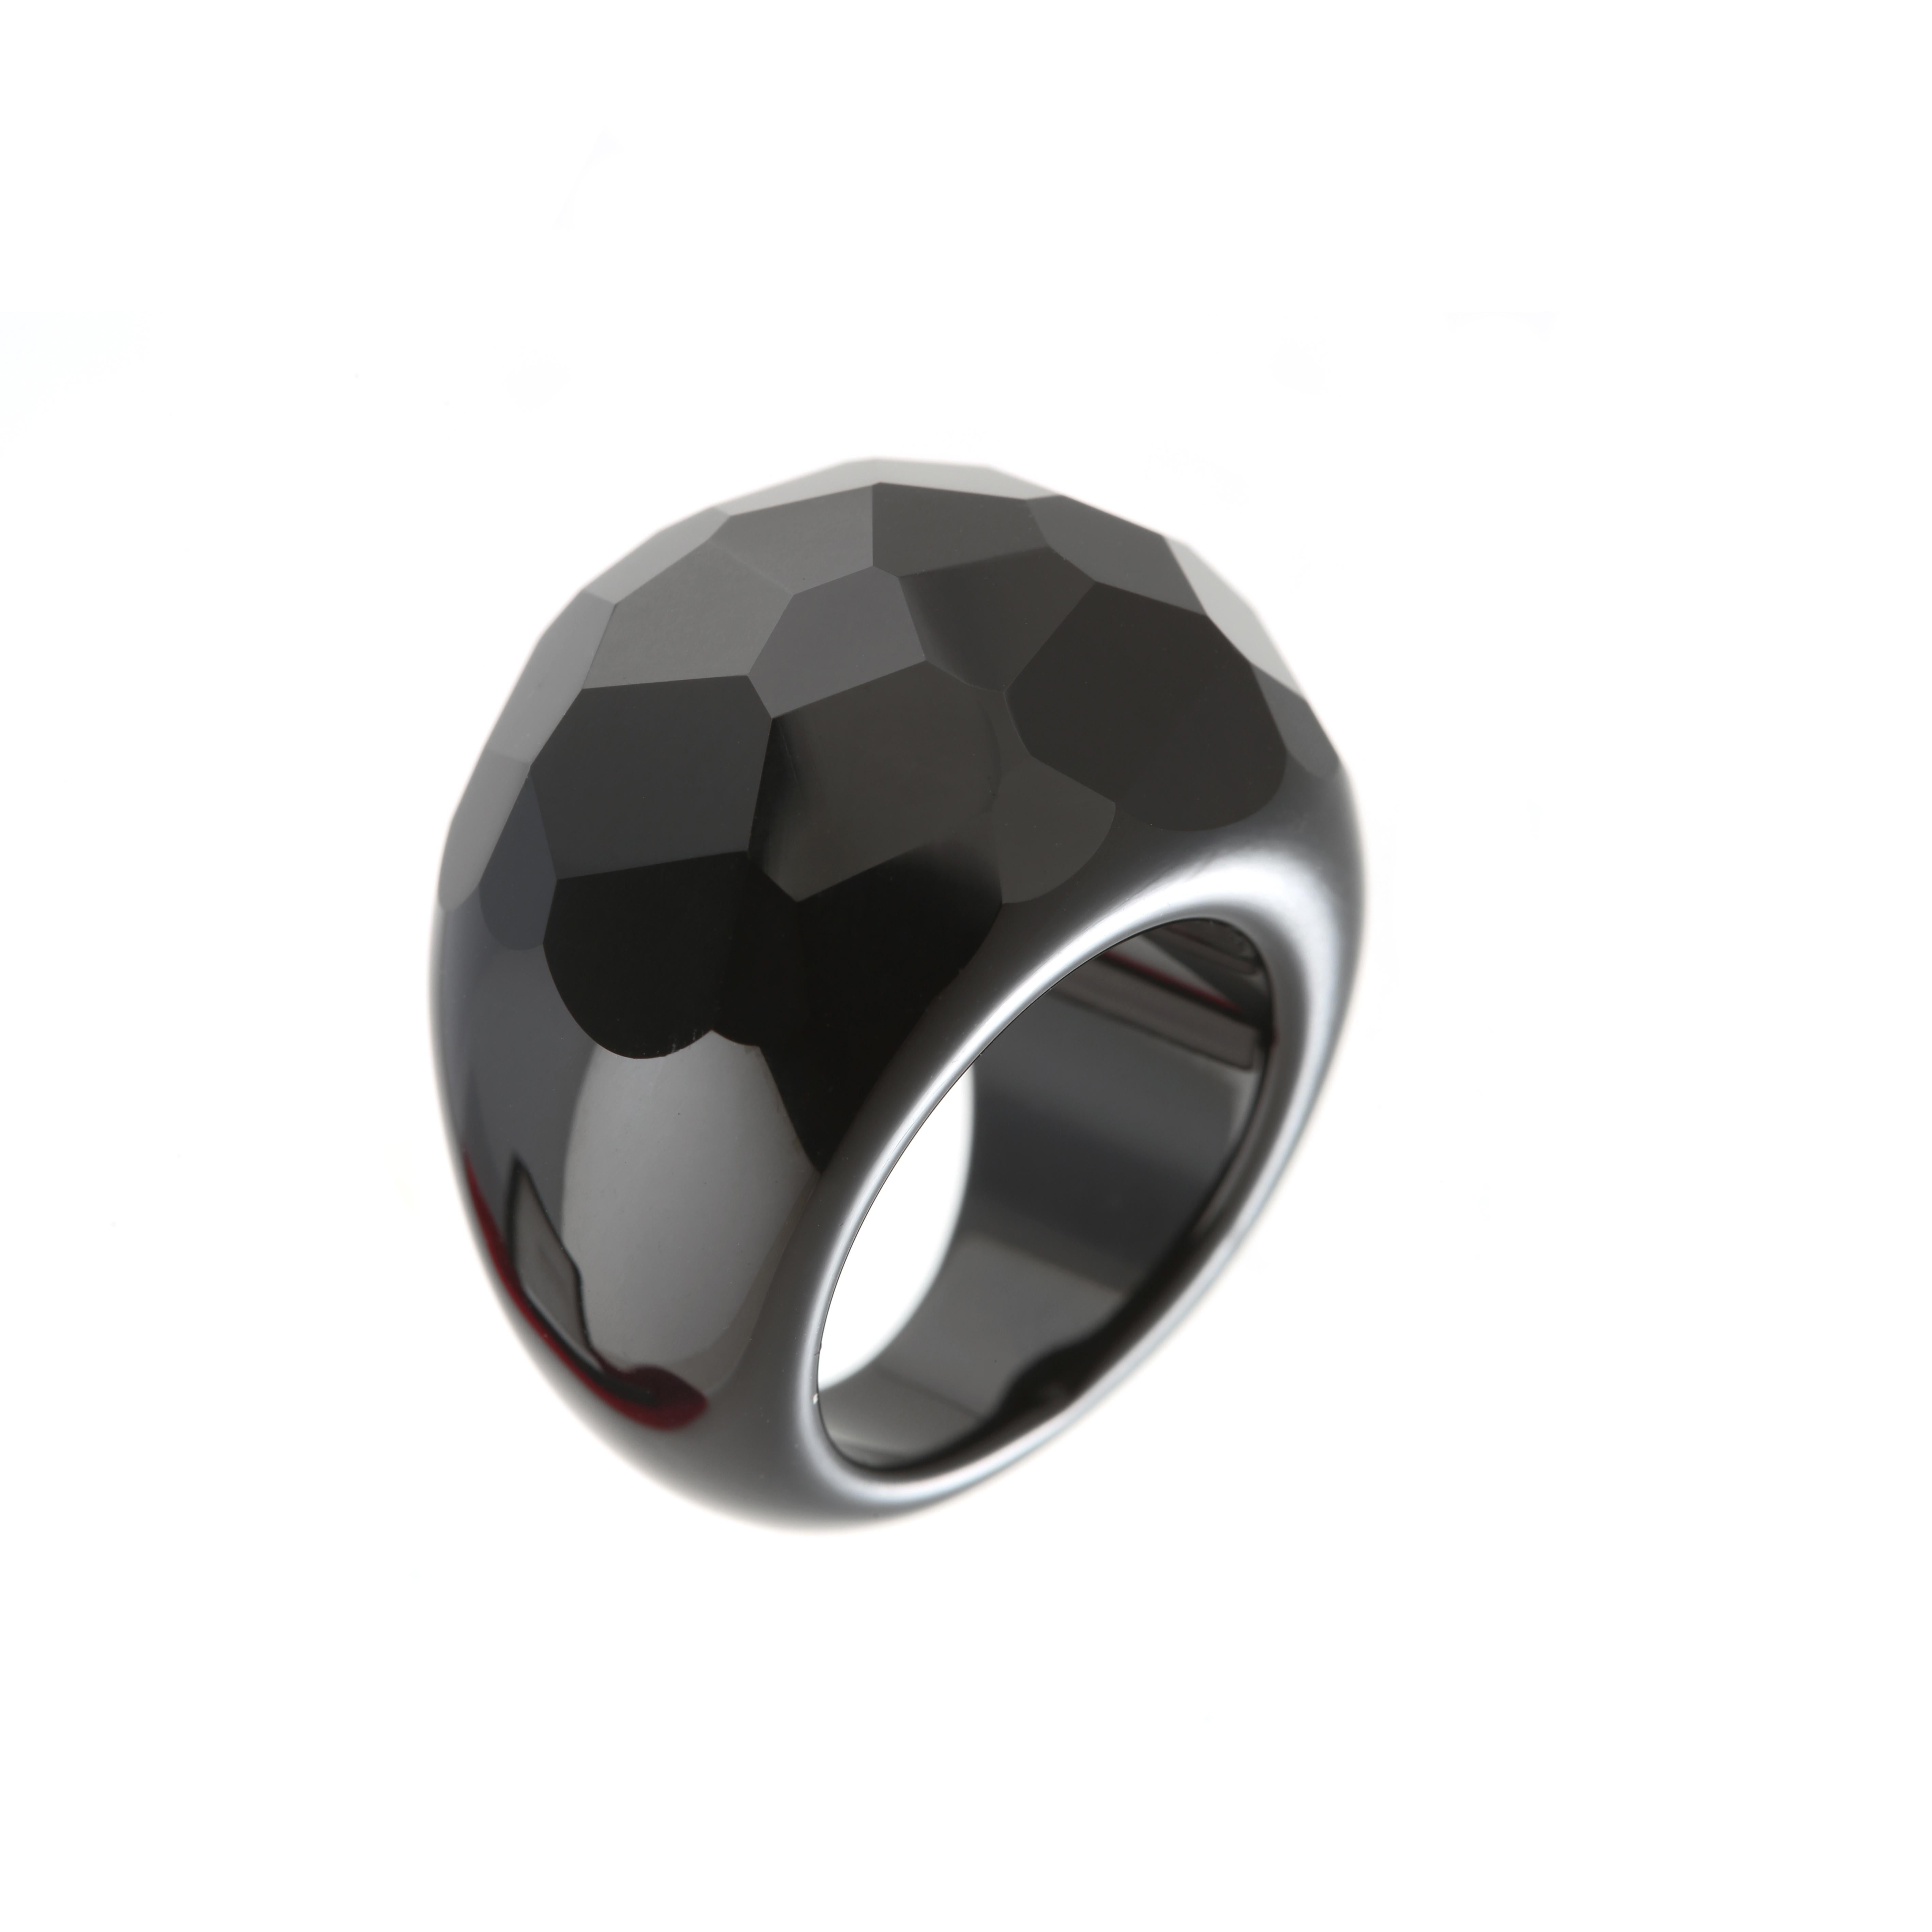 Delight yourself with a luminous handmade jewelry, a black agate ring perfect for an enigmatic night. A modern piece full of light and luxury. A simple touch of elegance that will decorate your hand with glamour and uniqueness. 

Immerse yourself in